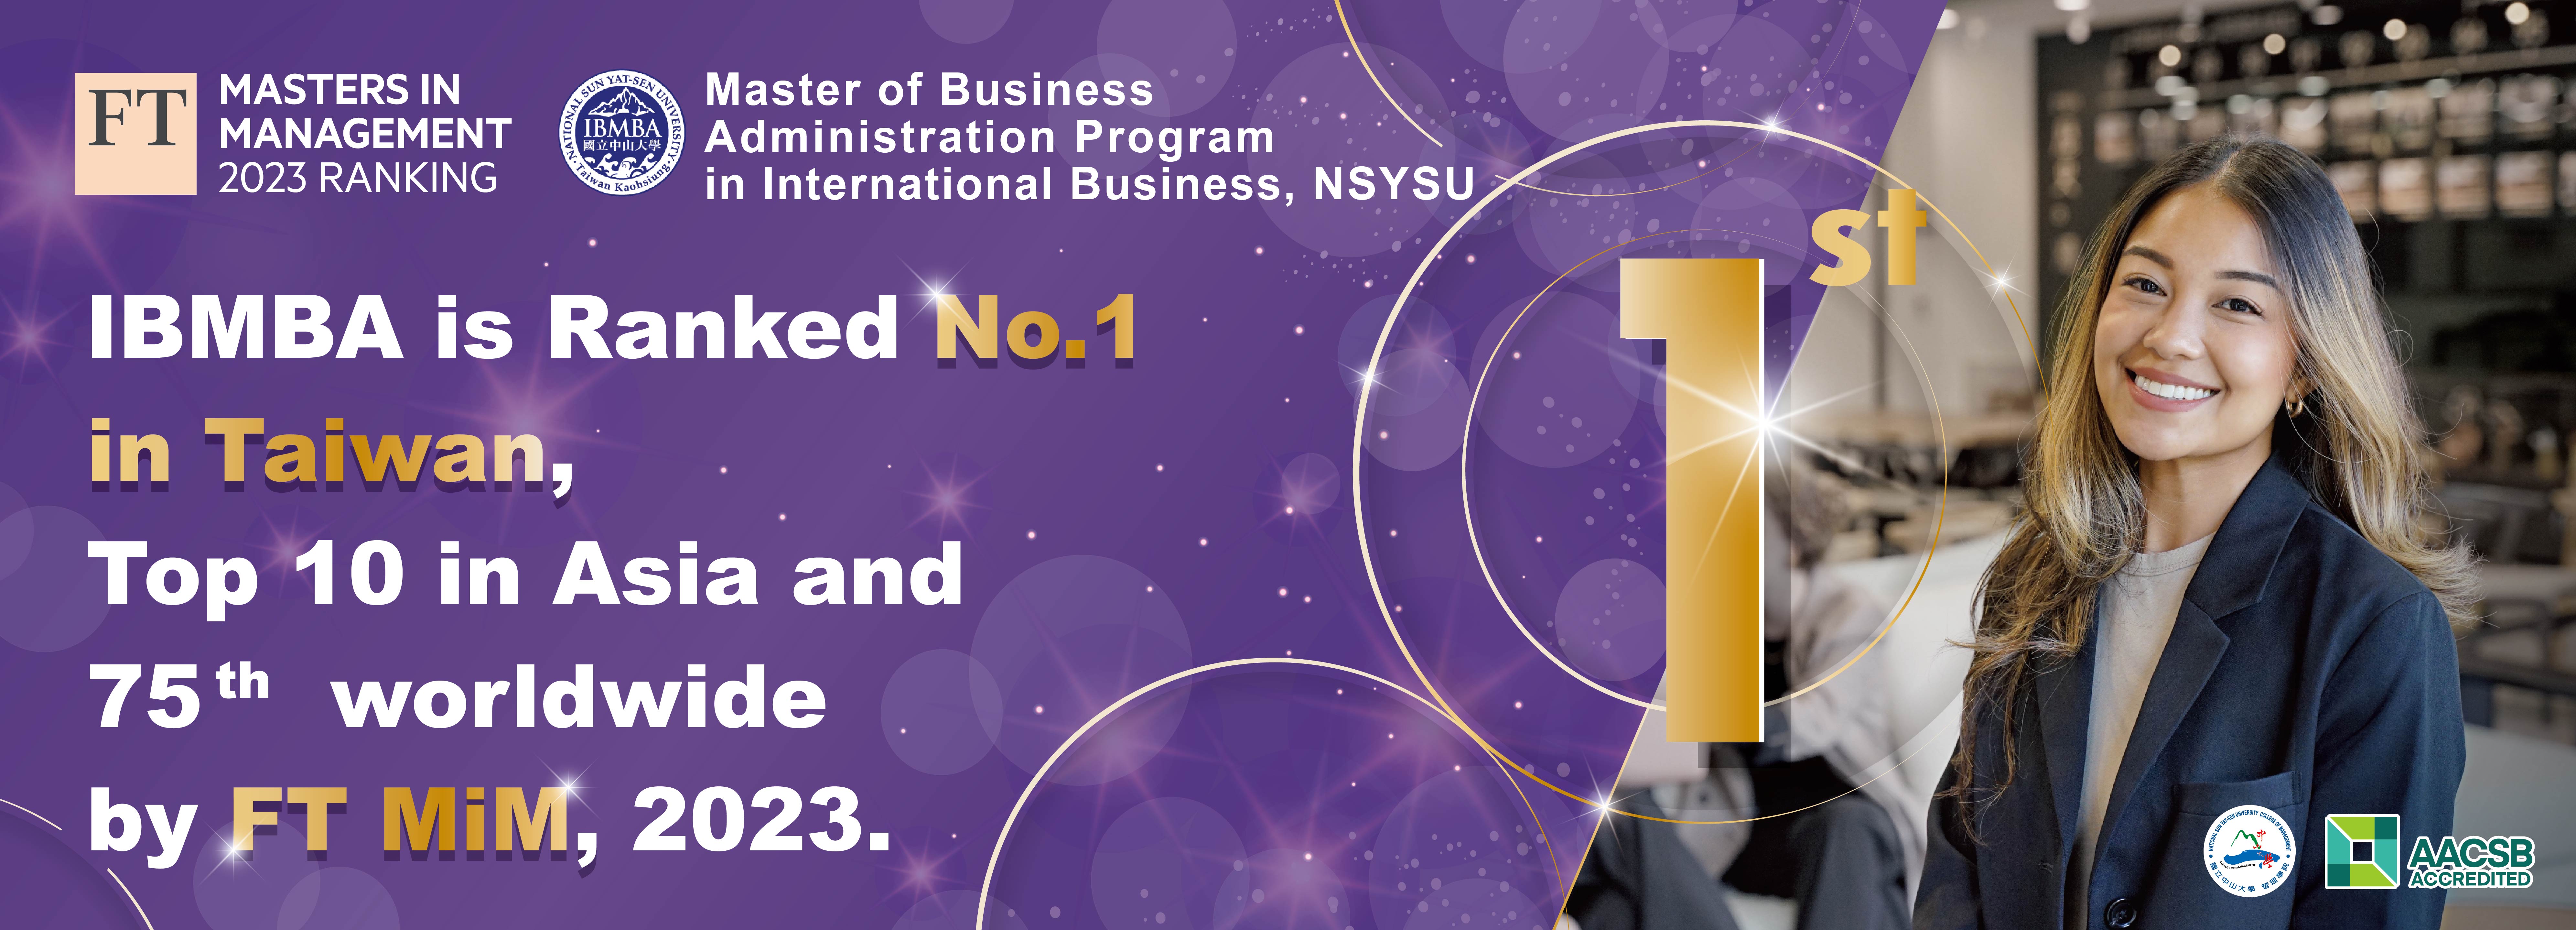 IBMBA is Ranked No. 1 in Taiwan and Ranked 75th worldwide by Financial Times Masters in Management 2023